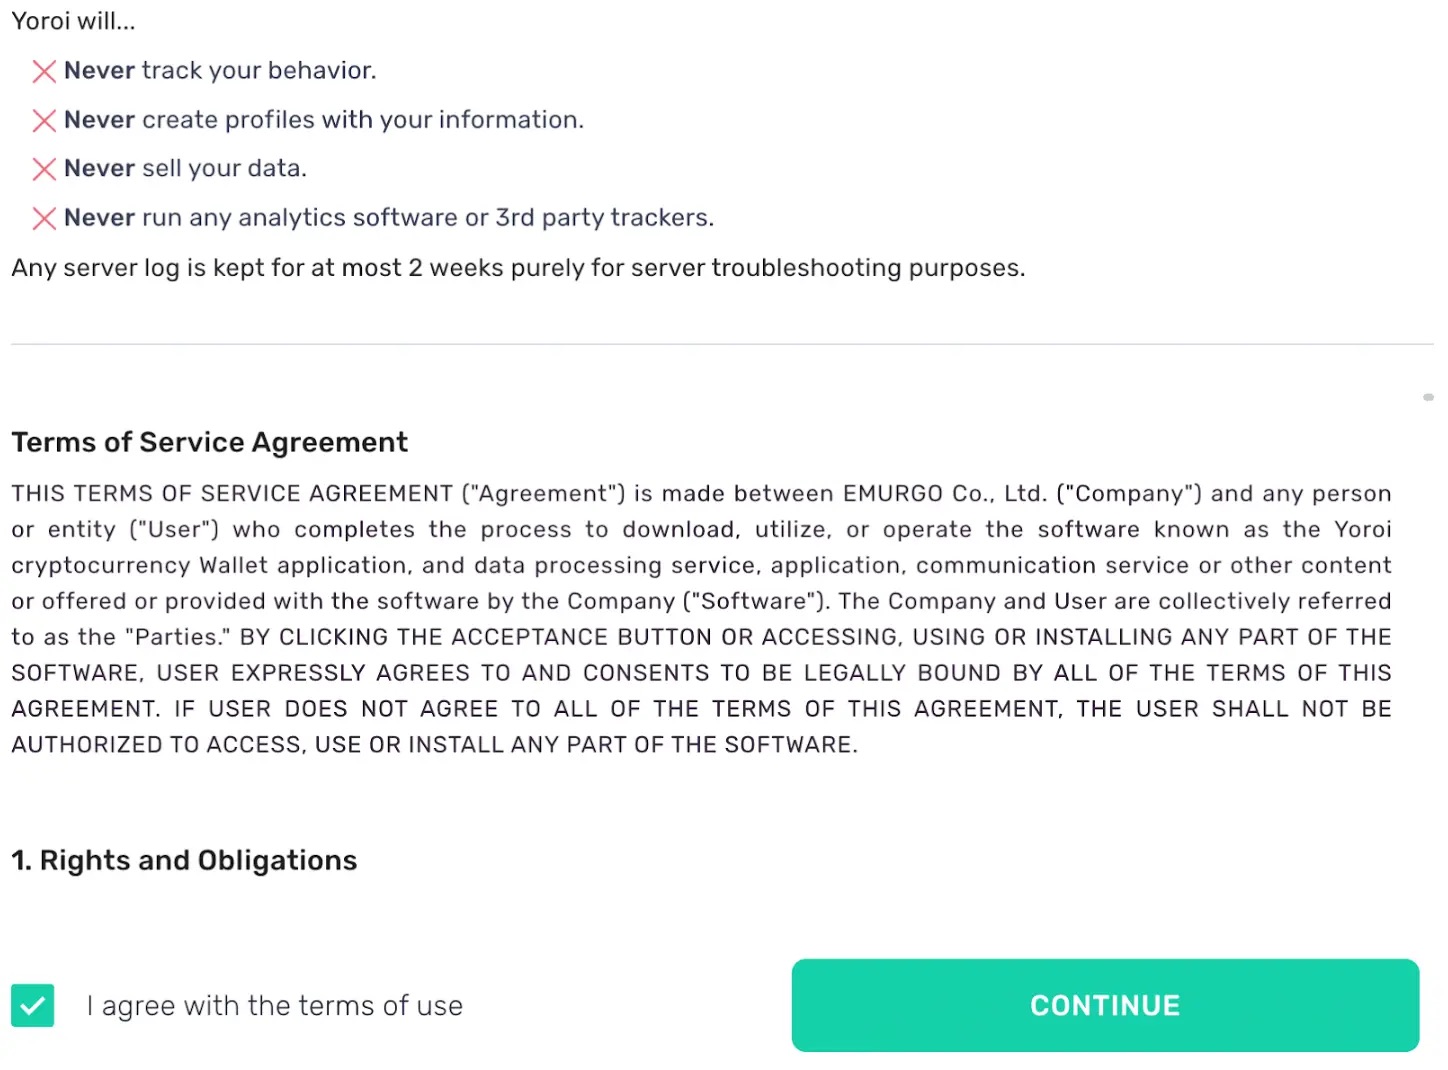 Yoroi wallet accept terms and conditions